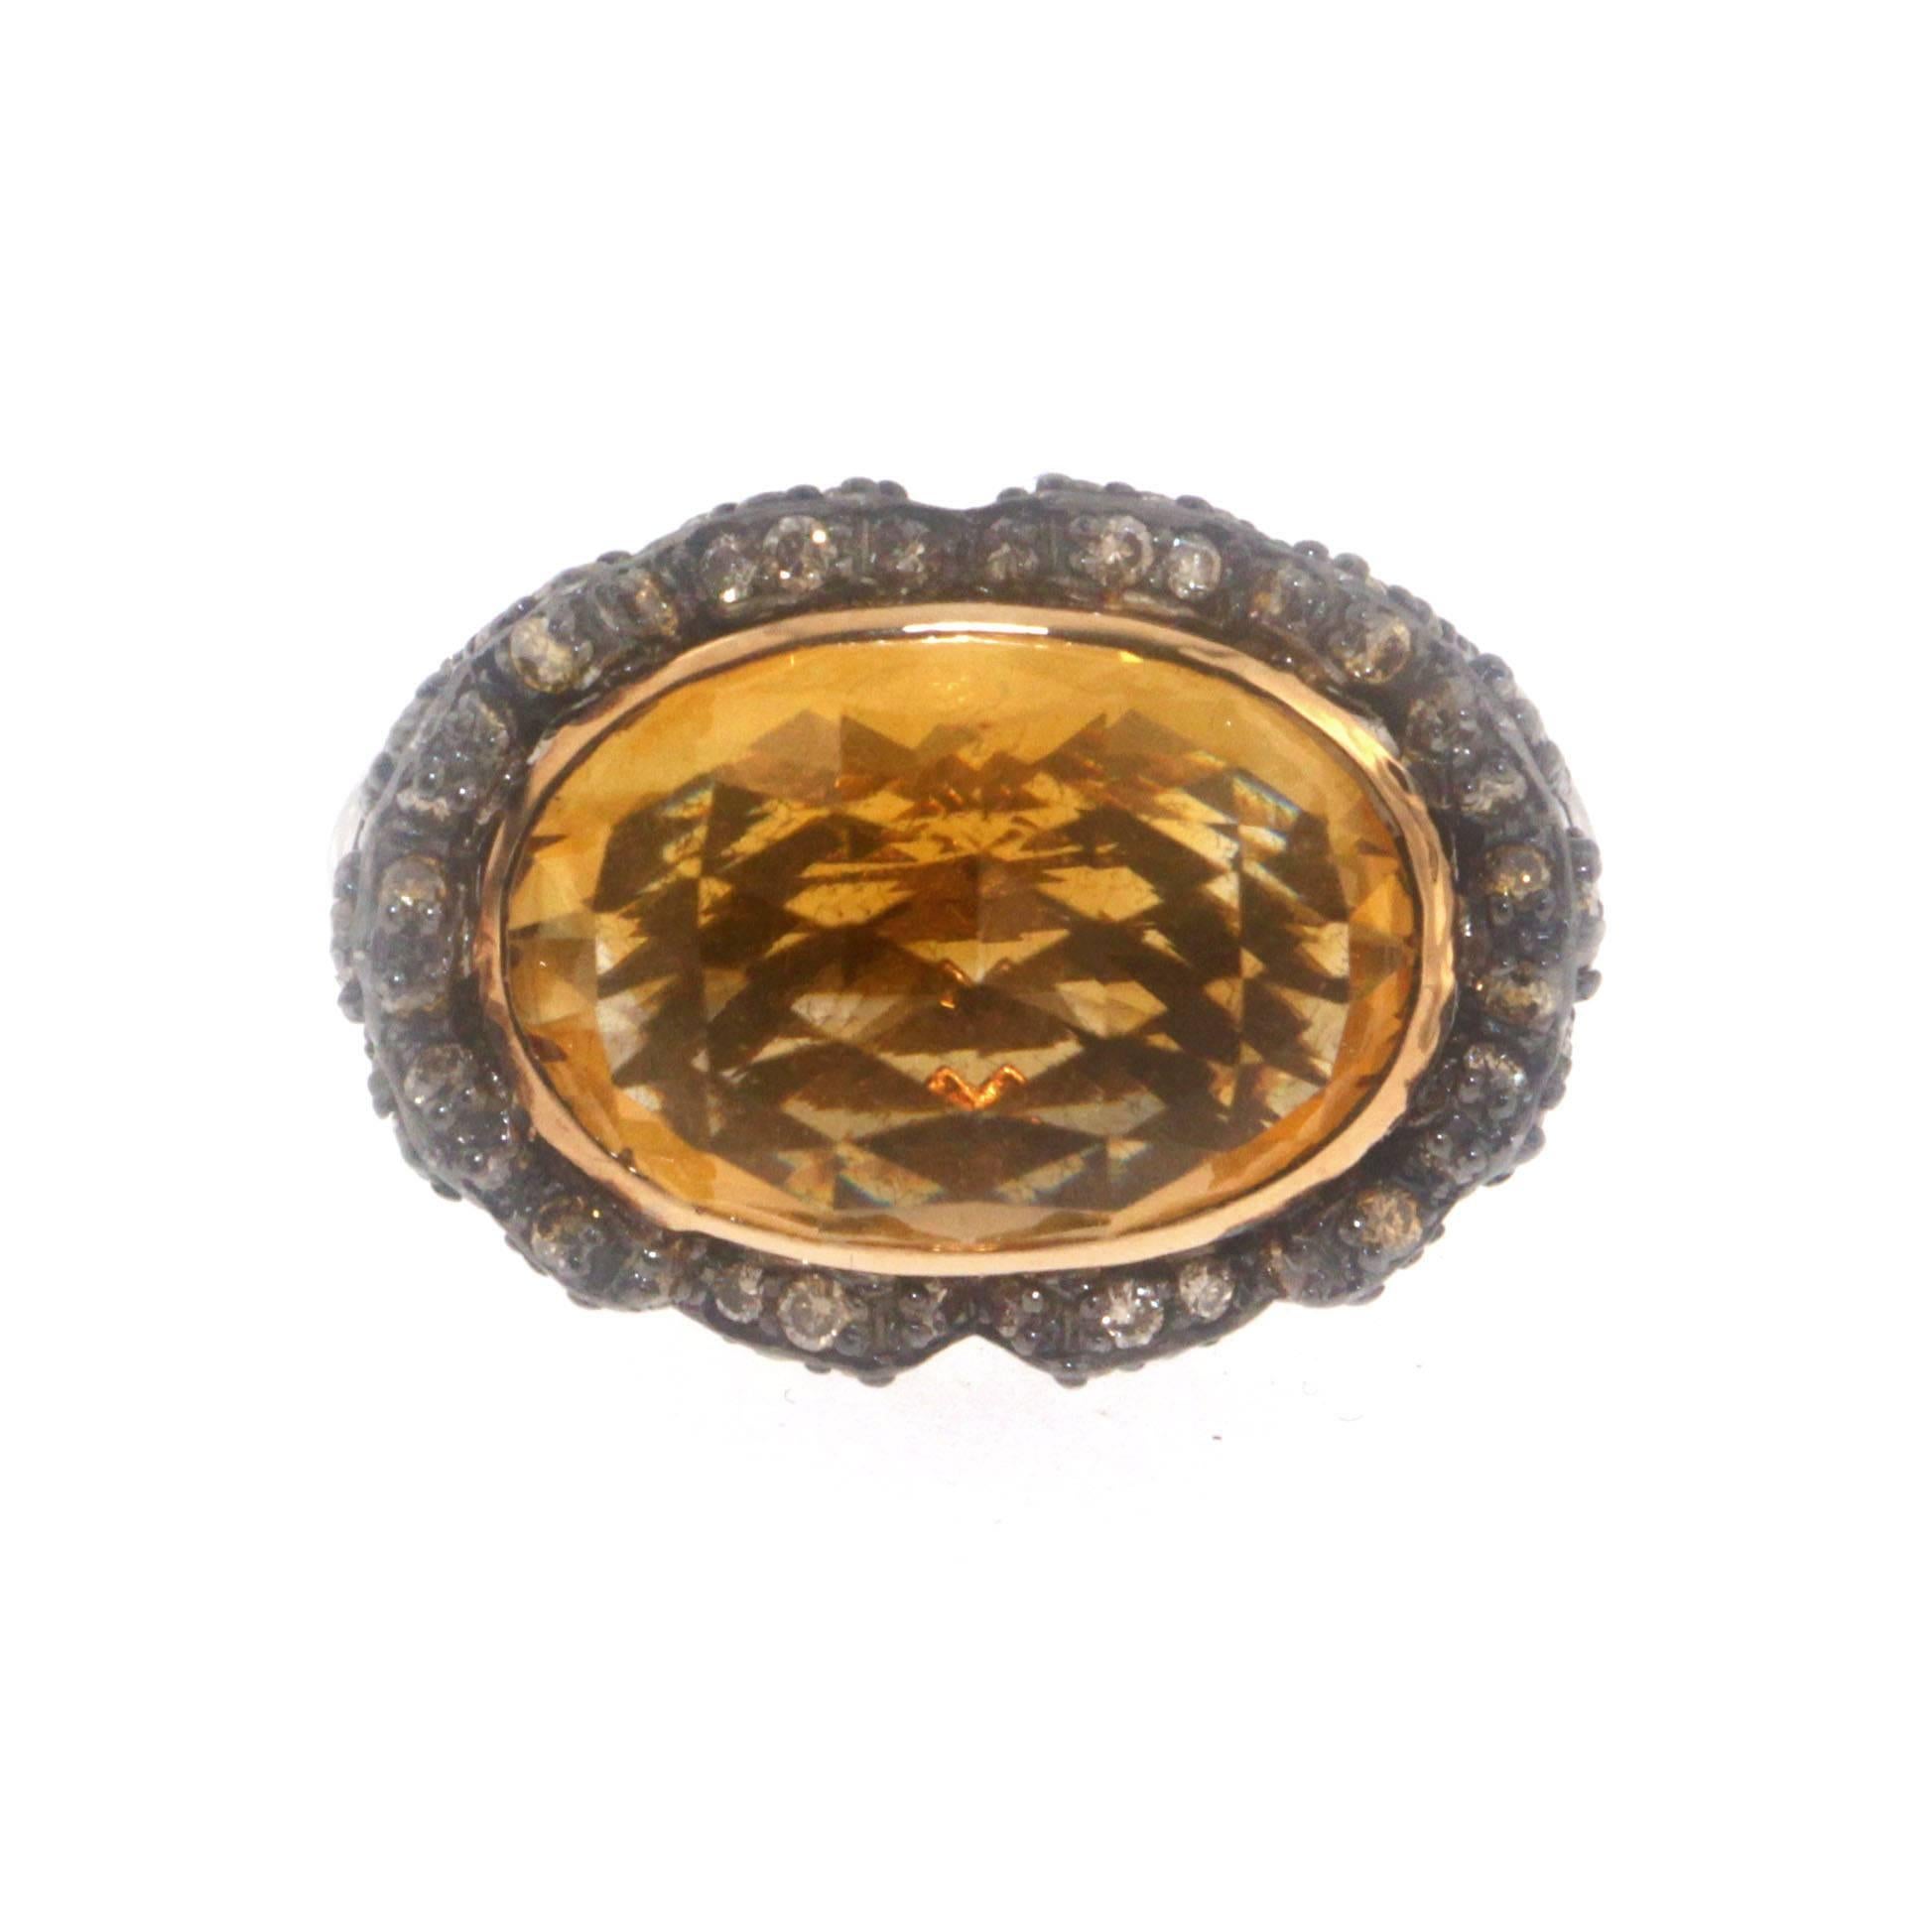 For the jewelry lover who loves to make a bold statement! Zorab's hand-crafted 9.65 Carat Citrine center stone Bombe Cocktail Ring is set with 0.78 Carats of Brown Diamonds and 0.62 Carats of Yellow Diamonds, on 18 Karat Gold and Palladium; making